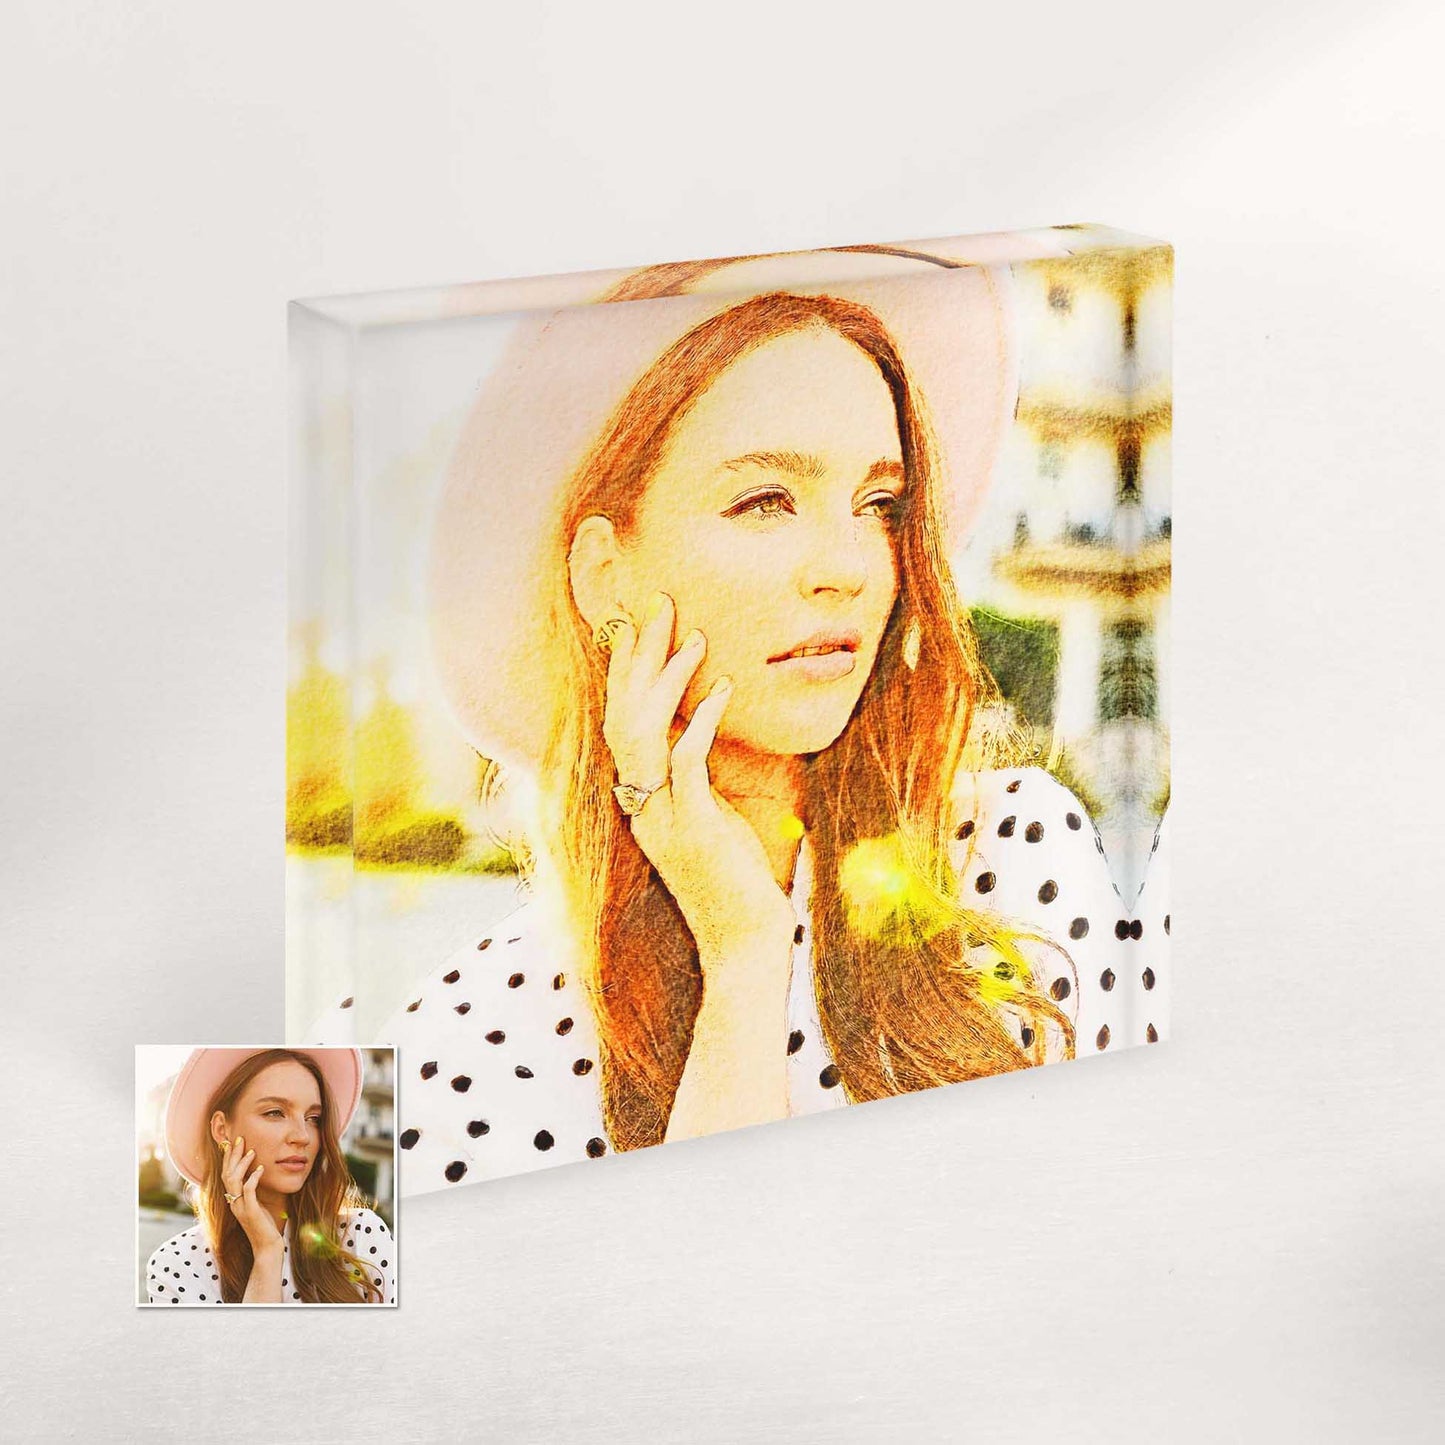 Add a touch of artistic flair to your home decor with our Personalised Just Watercolor Effect Acrylic Block Photo. Each piece is meticulously crafted from your own photo, turning it into a captivating watercolor